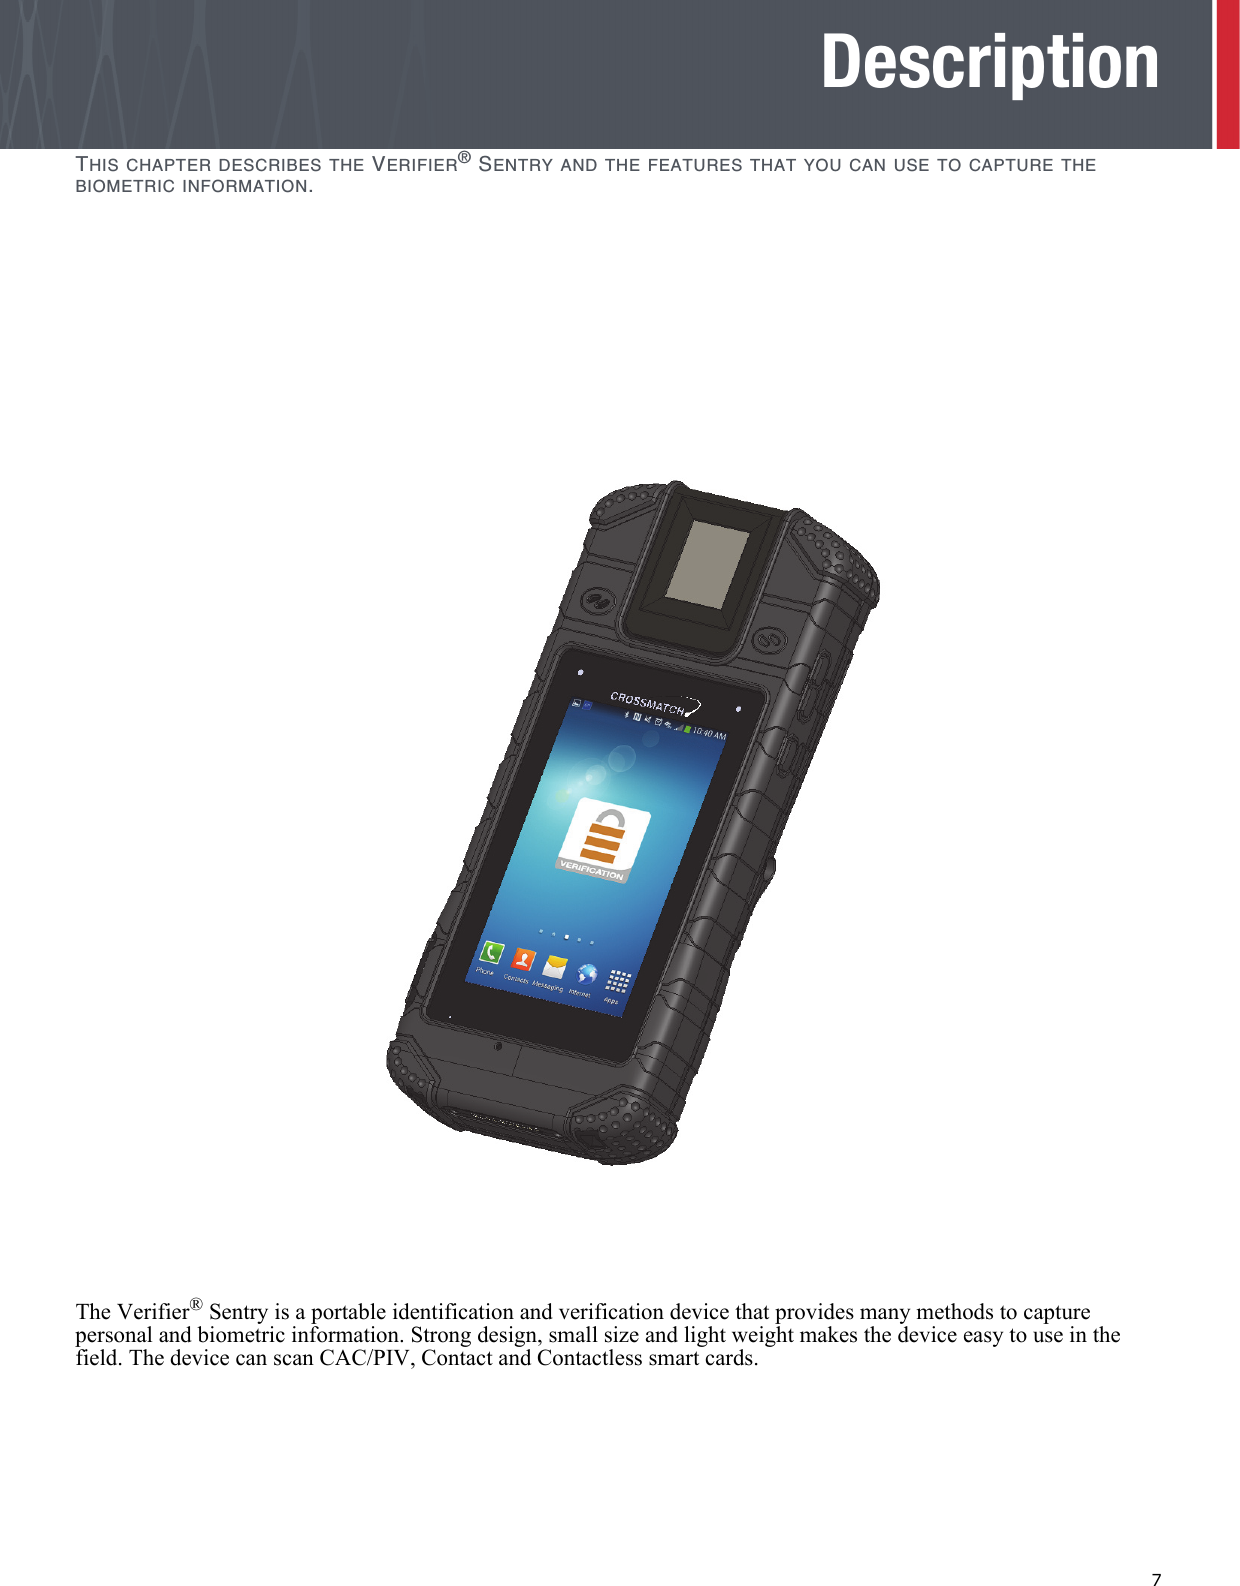   7DescriptionTHIS CHAPTER DESCRIBES THE VERIFIER® SENTRY AND THE FEATURES THAT YOU CAN USE TO CAPTURE THE BIOMETRIC INFORMATION.The Verifier® Sentry is a portable identification and verification device that provides many methods to capture personal and biometric information. Strong design, small size and light weight makes the device easy to use in the field. The device can scan CAC/PIV, Contact and Contactless smart cards. 